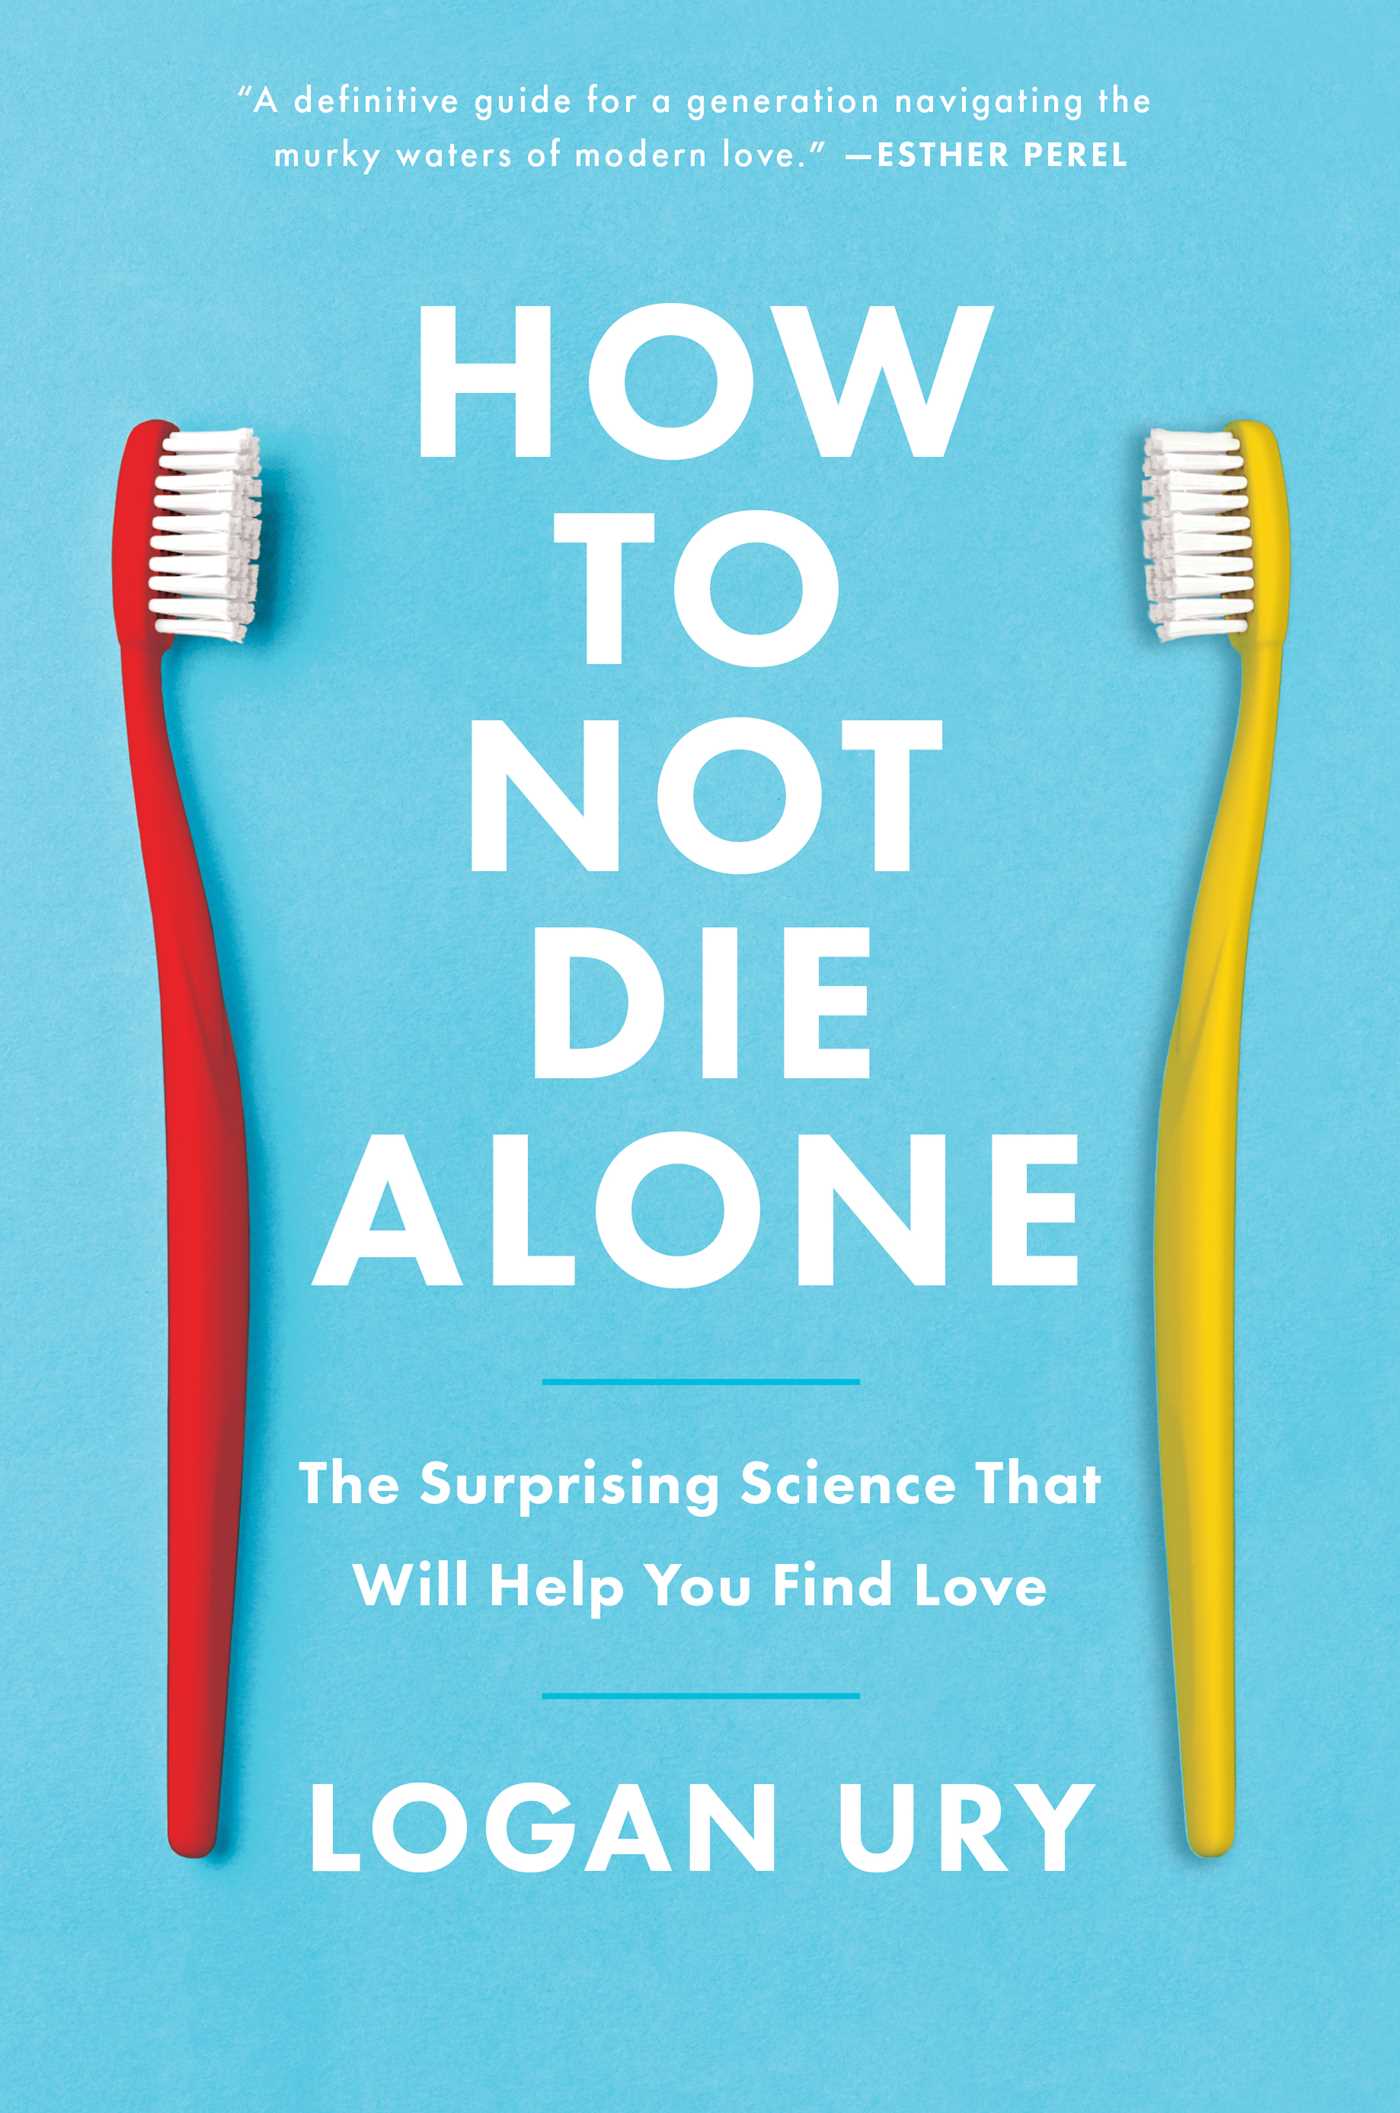 Book cover of How to not die alone by Logan Ury